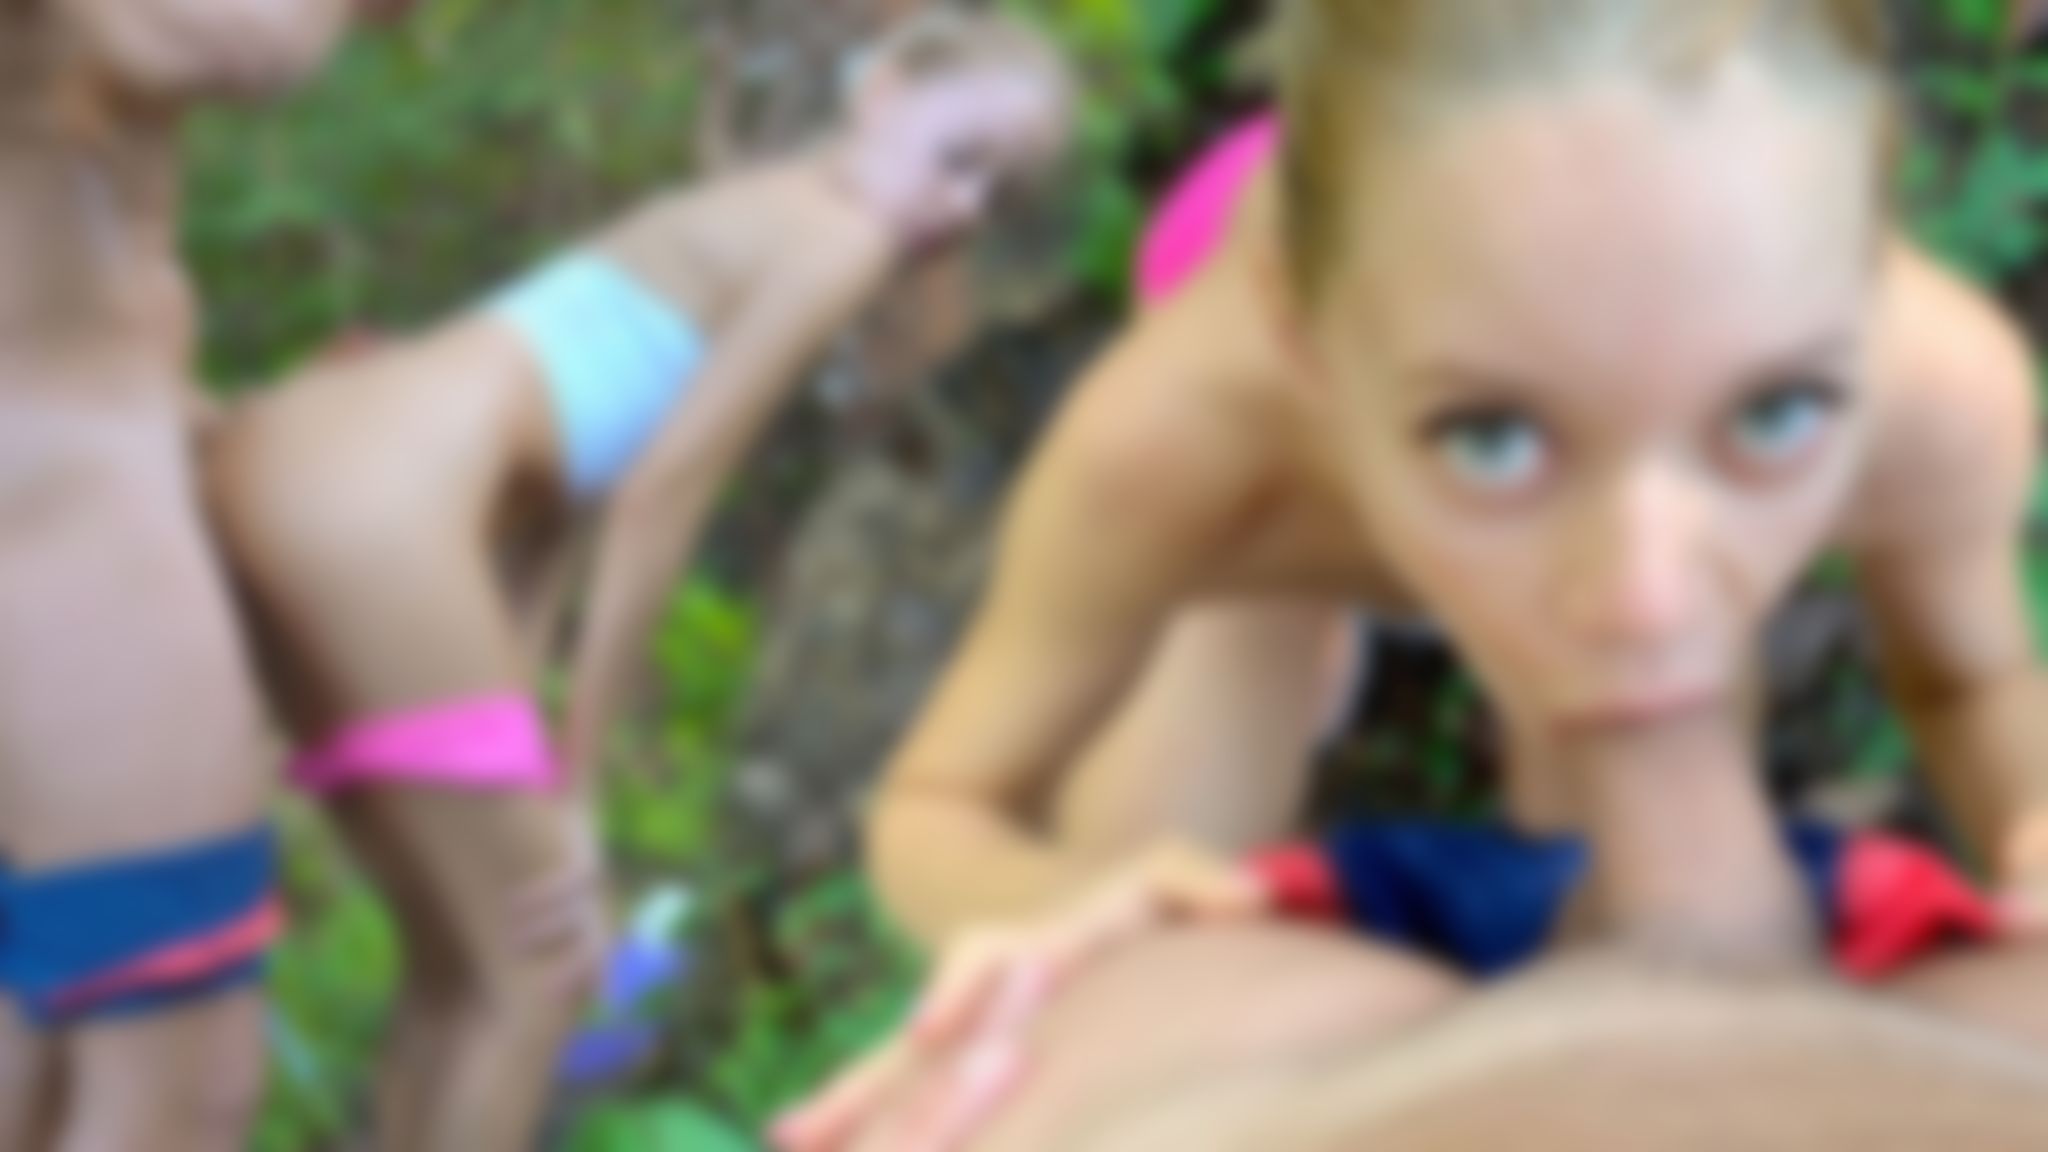 i*****e : Hot Blonde girl Bent over in the forest! 🔥 金髮淫娃 🙈 🙉 🙊露出